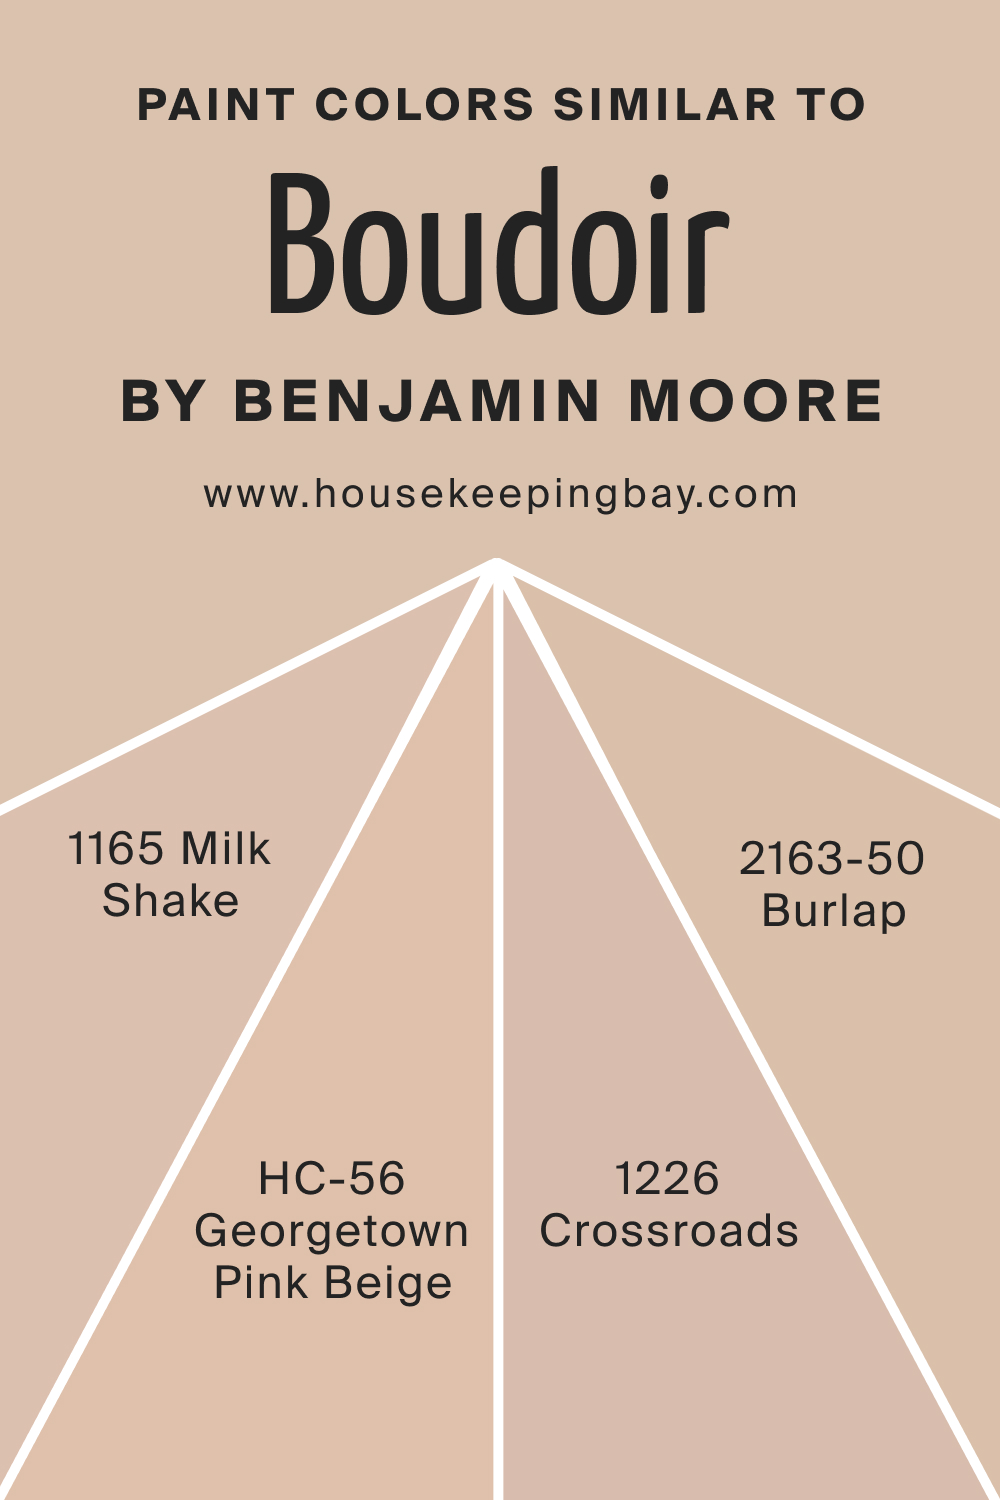 Paint Colors Similar to Boudoir AF 190 by Benjamin Moore